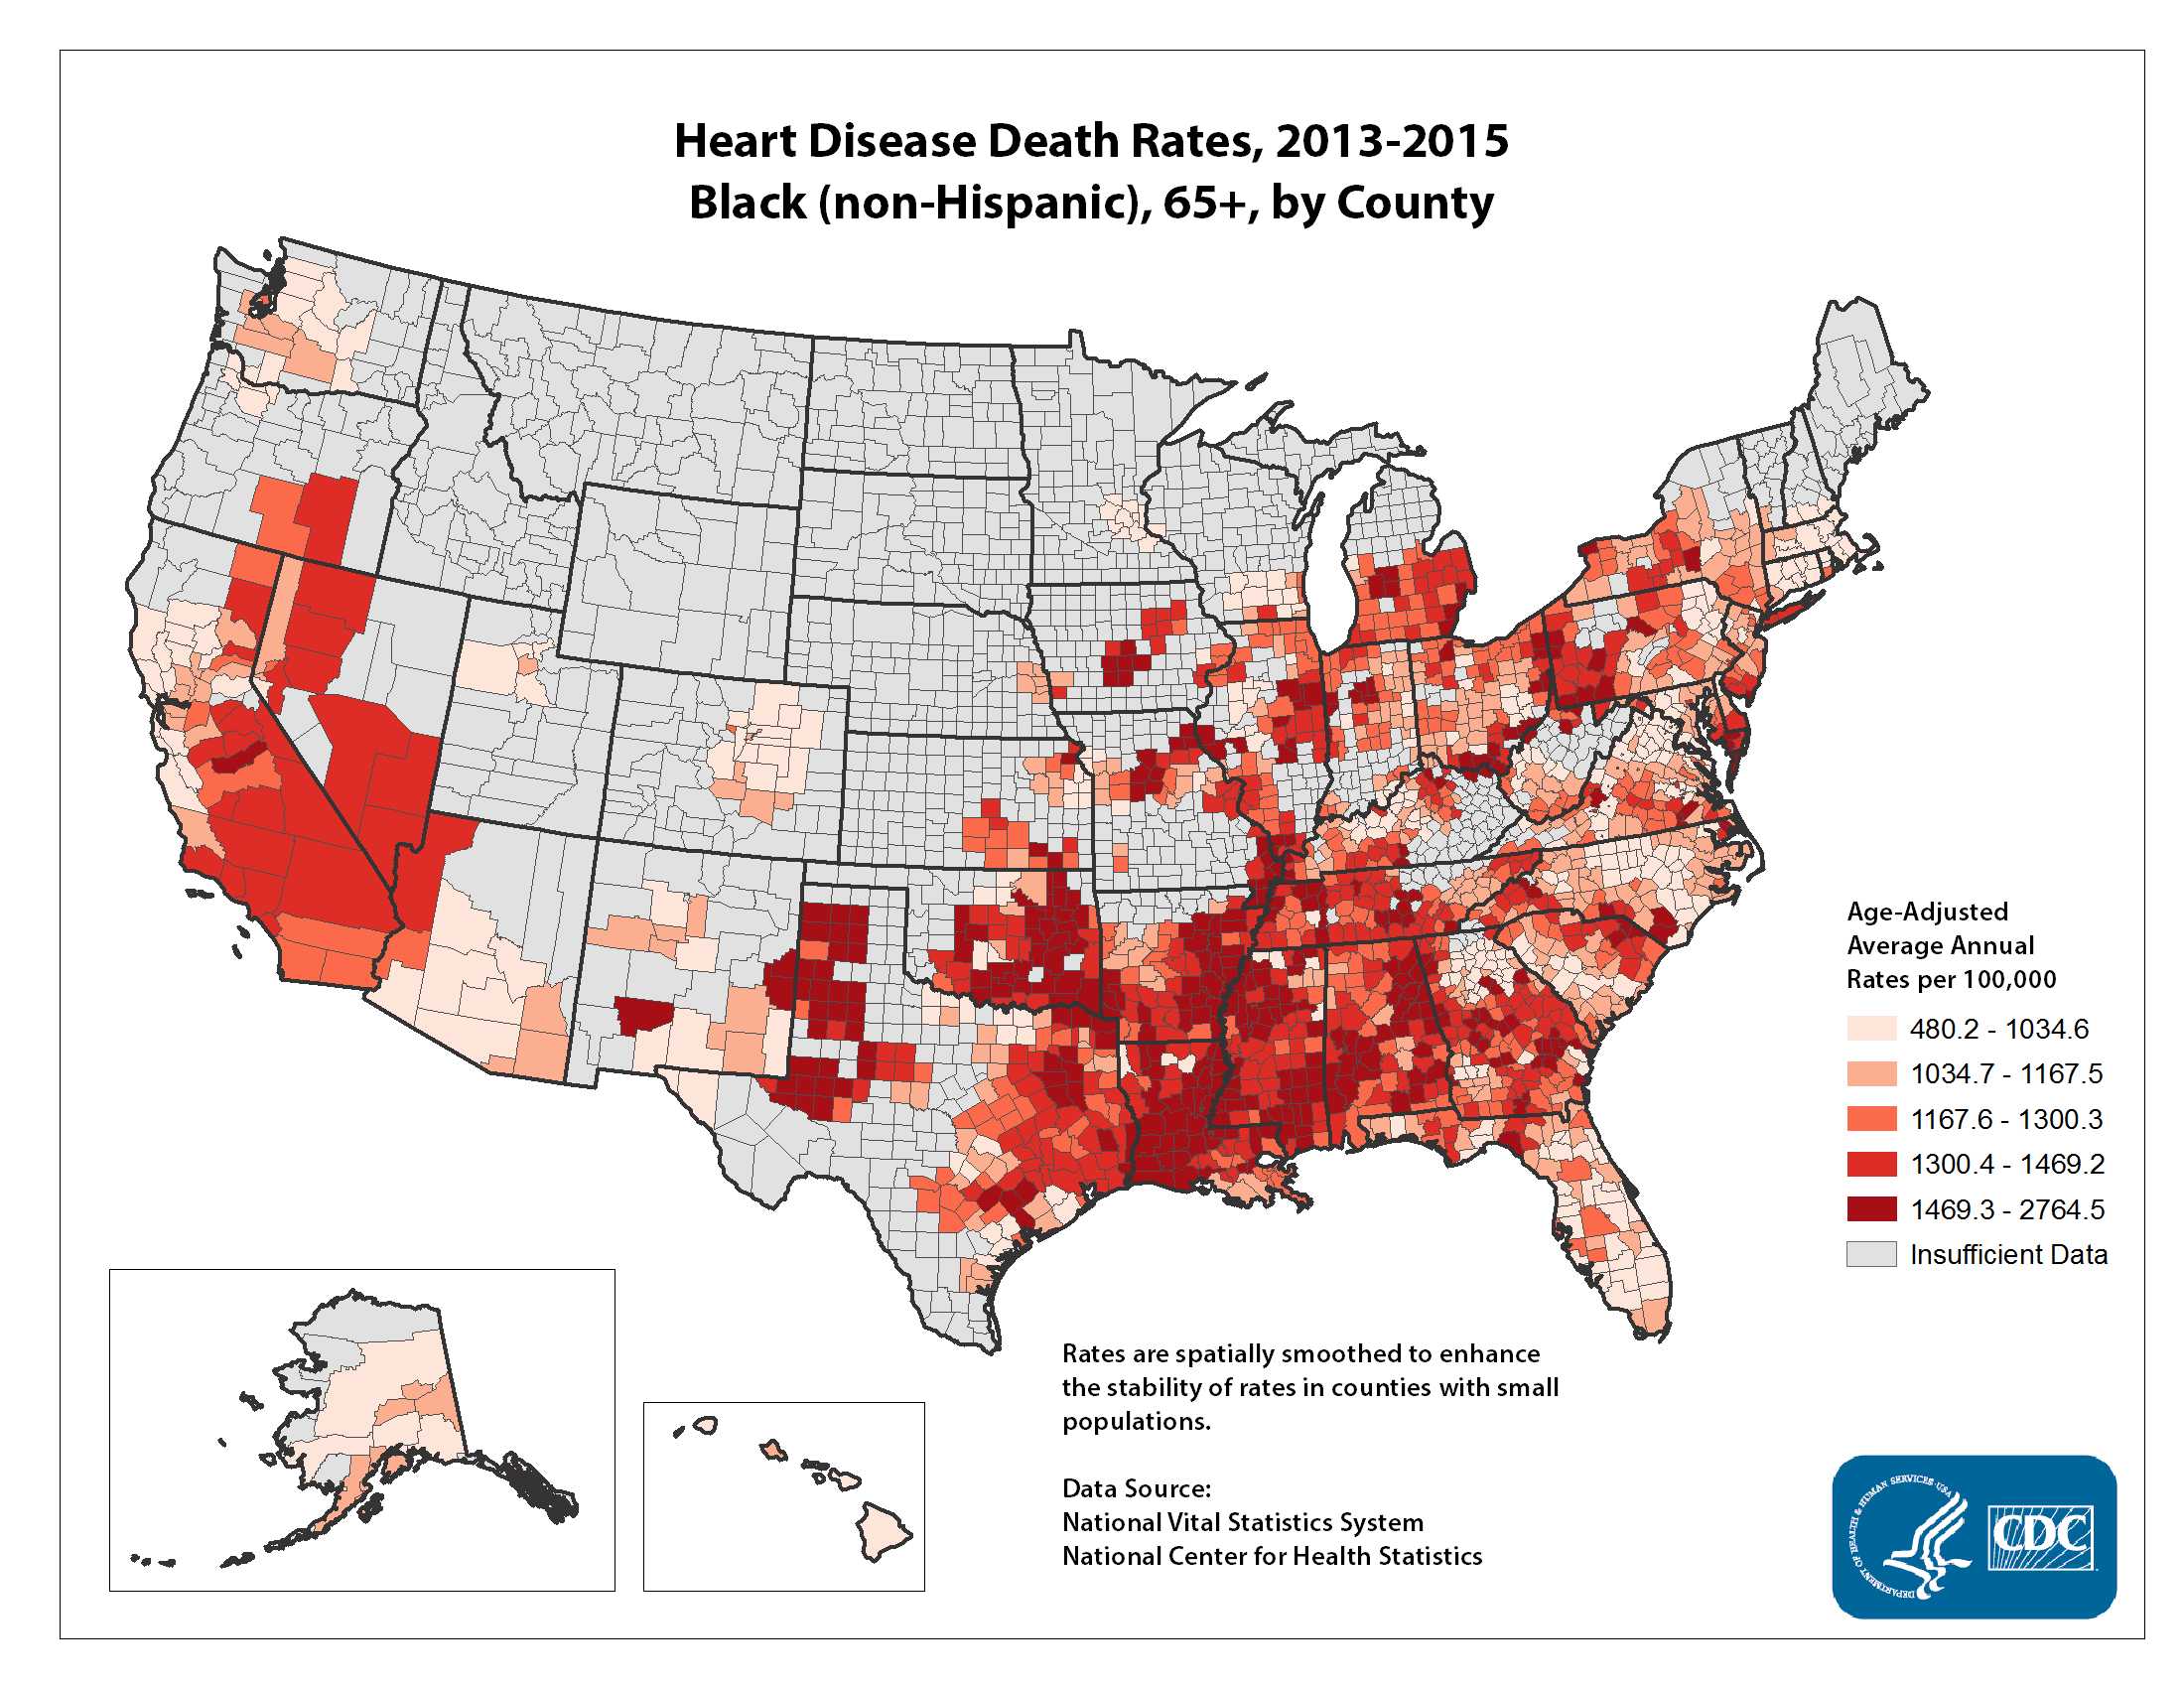 Heart Disease Death Rates for 2012 through 2014 for Blacks Aged 65 Years and Older by County. The map shows that concentrations of counties with the highest heart disease death rates for Blacks - meaning the top quintile - are located primarily in Mississippi, Alabama, Louisiana, and Oklahoma.  Pockets of high-rate counties also were found in parts of California, Georgia, Arkansas, and Texas.